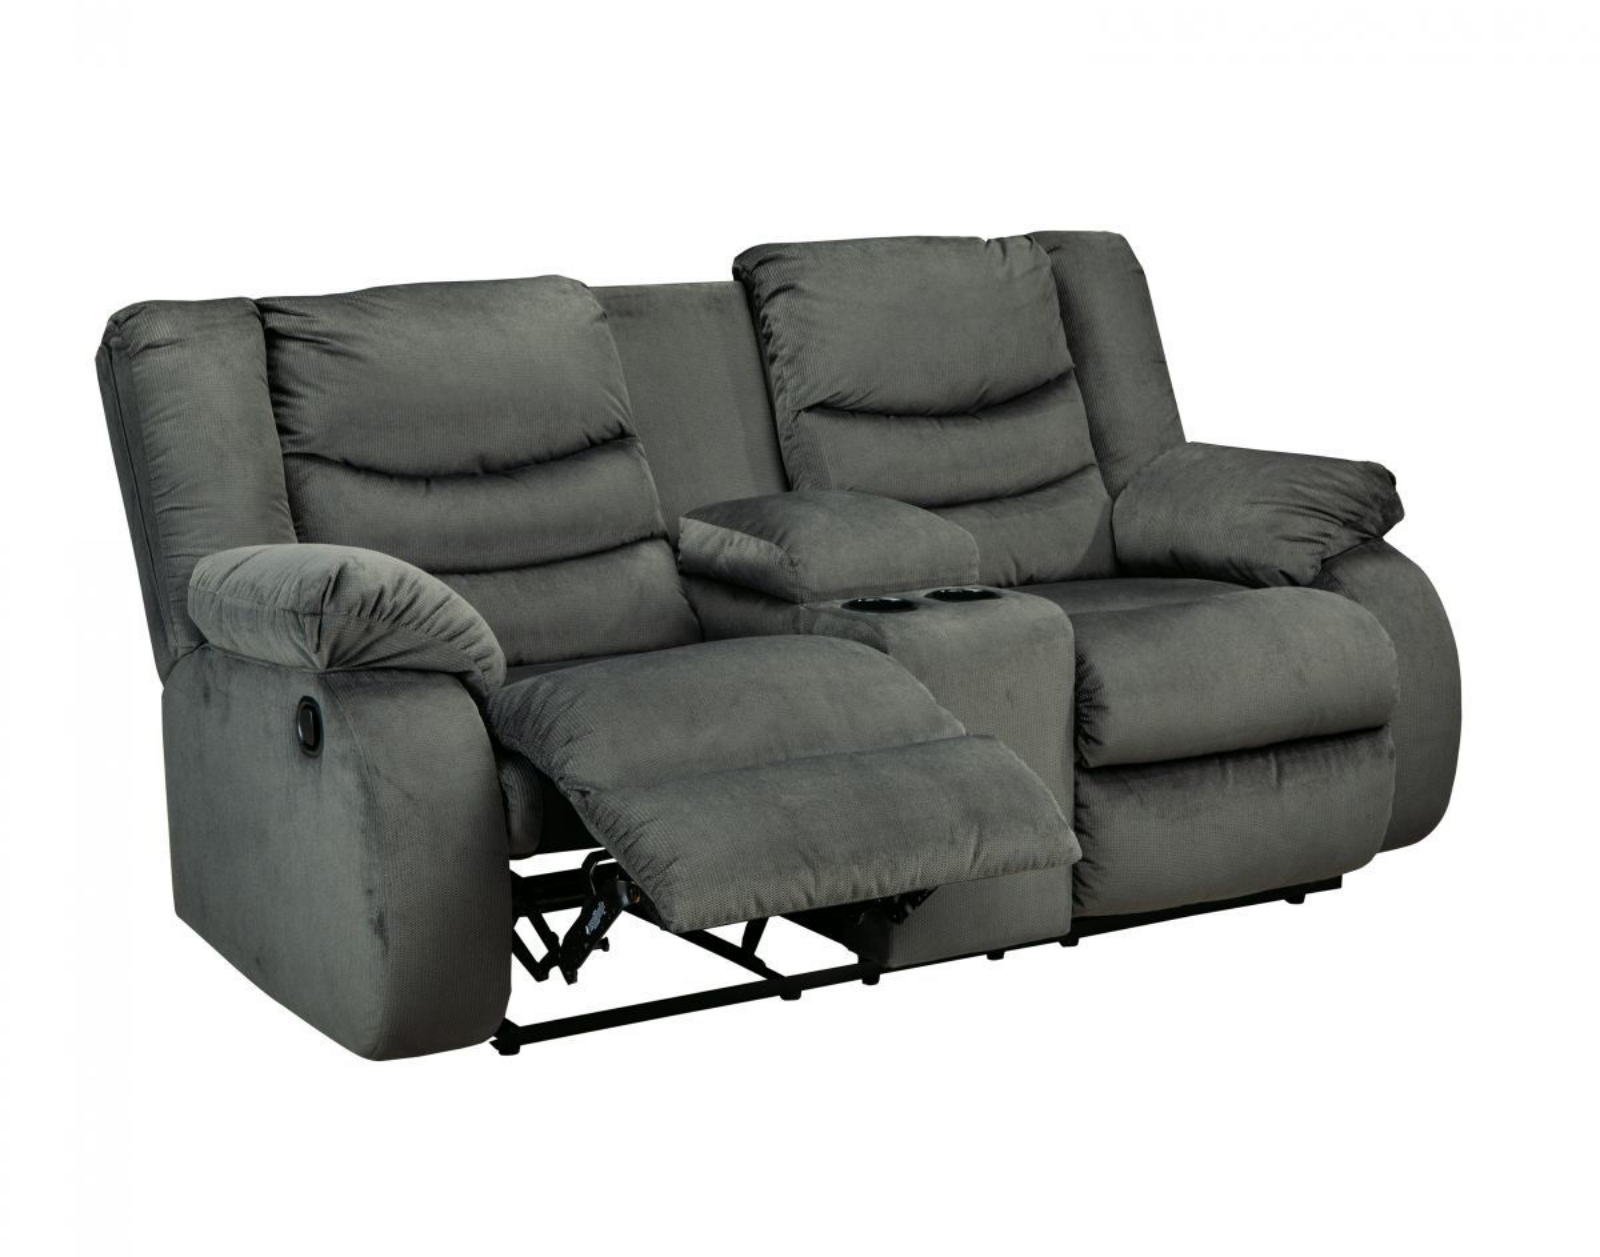 Picture of Chivington Reclining Loveseat